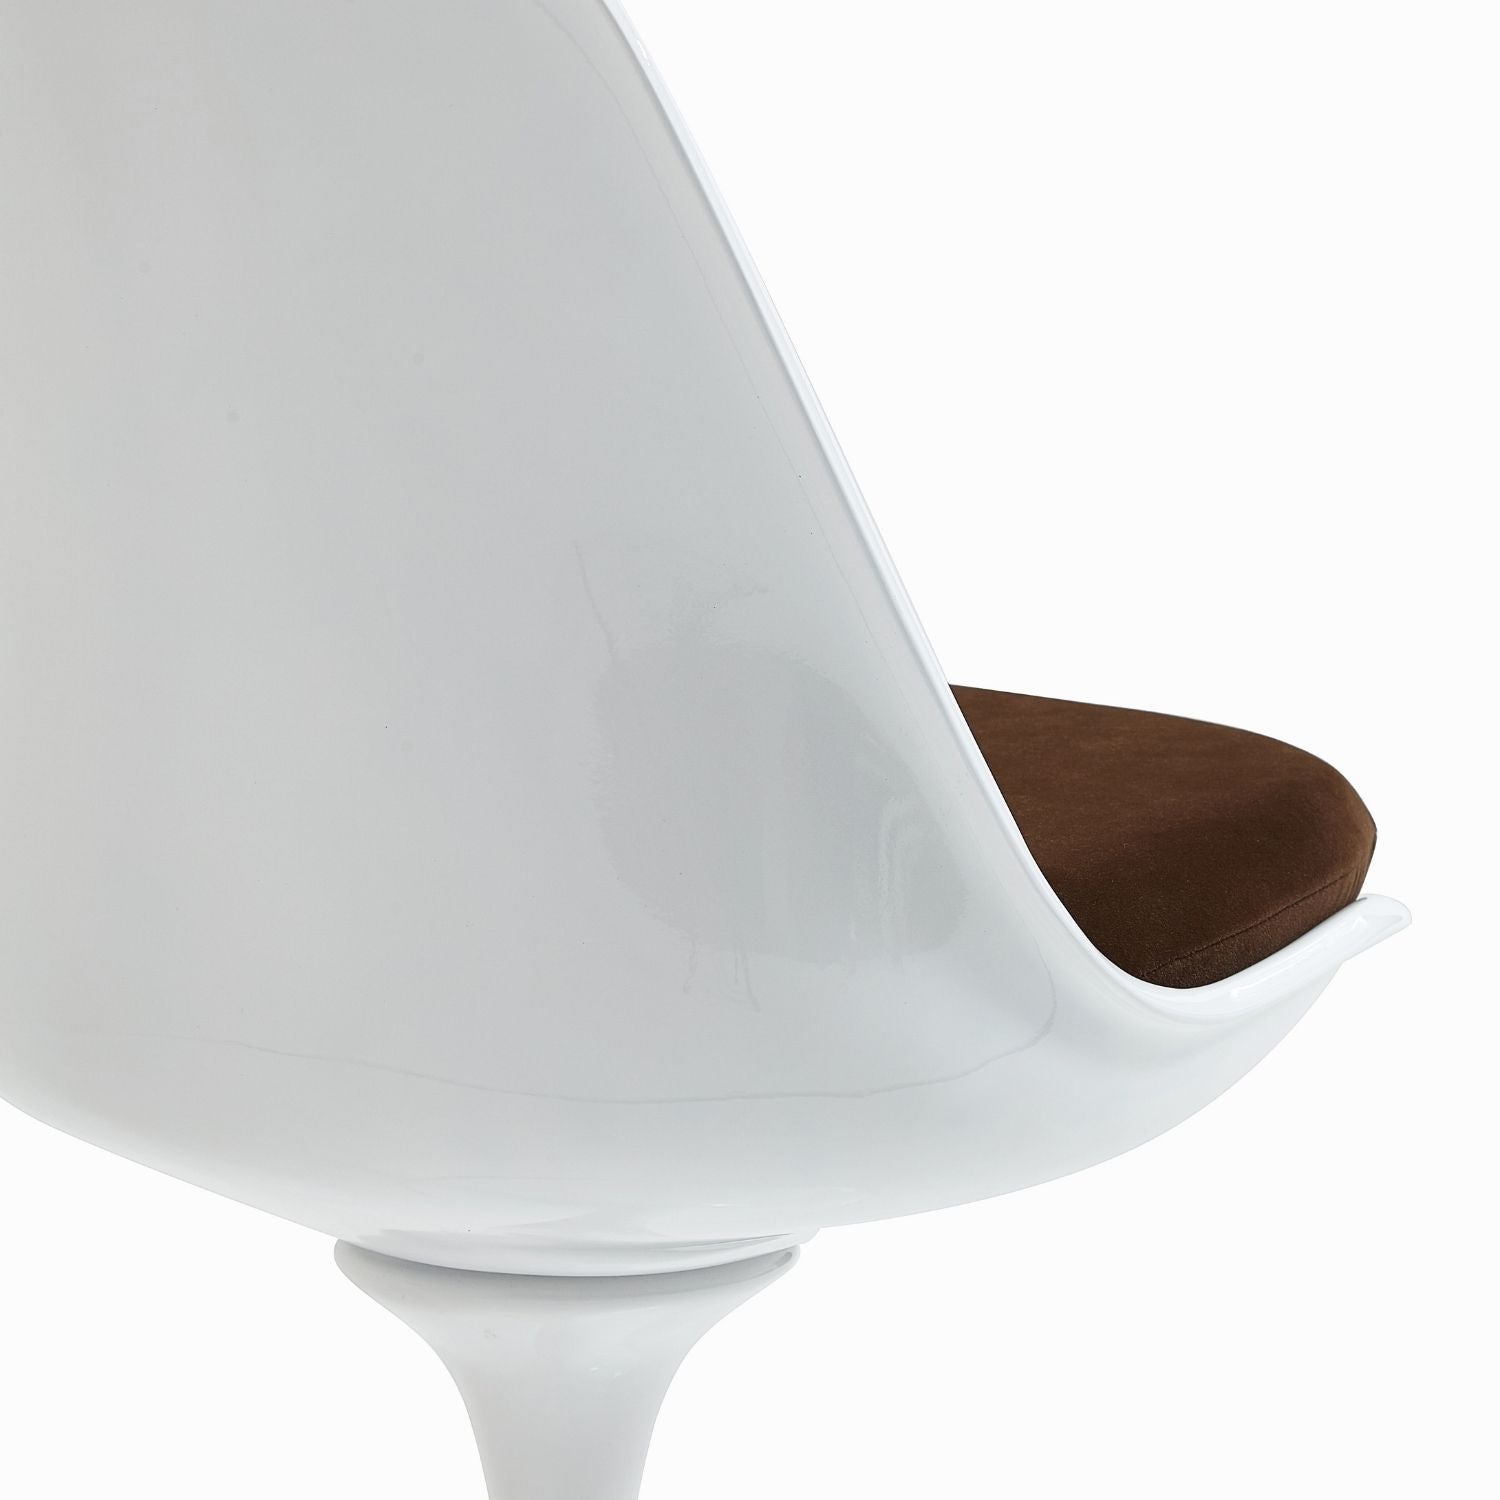 Mella Dining Chair - Valyou 